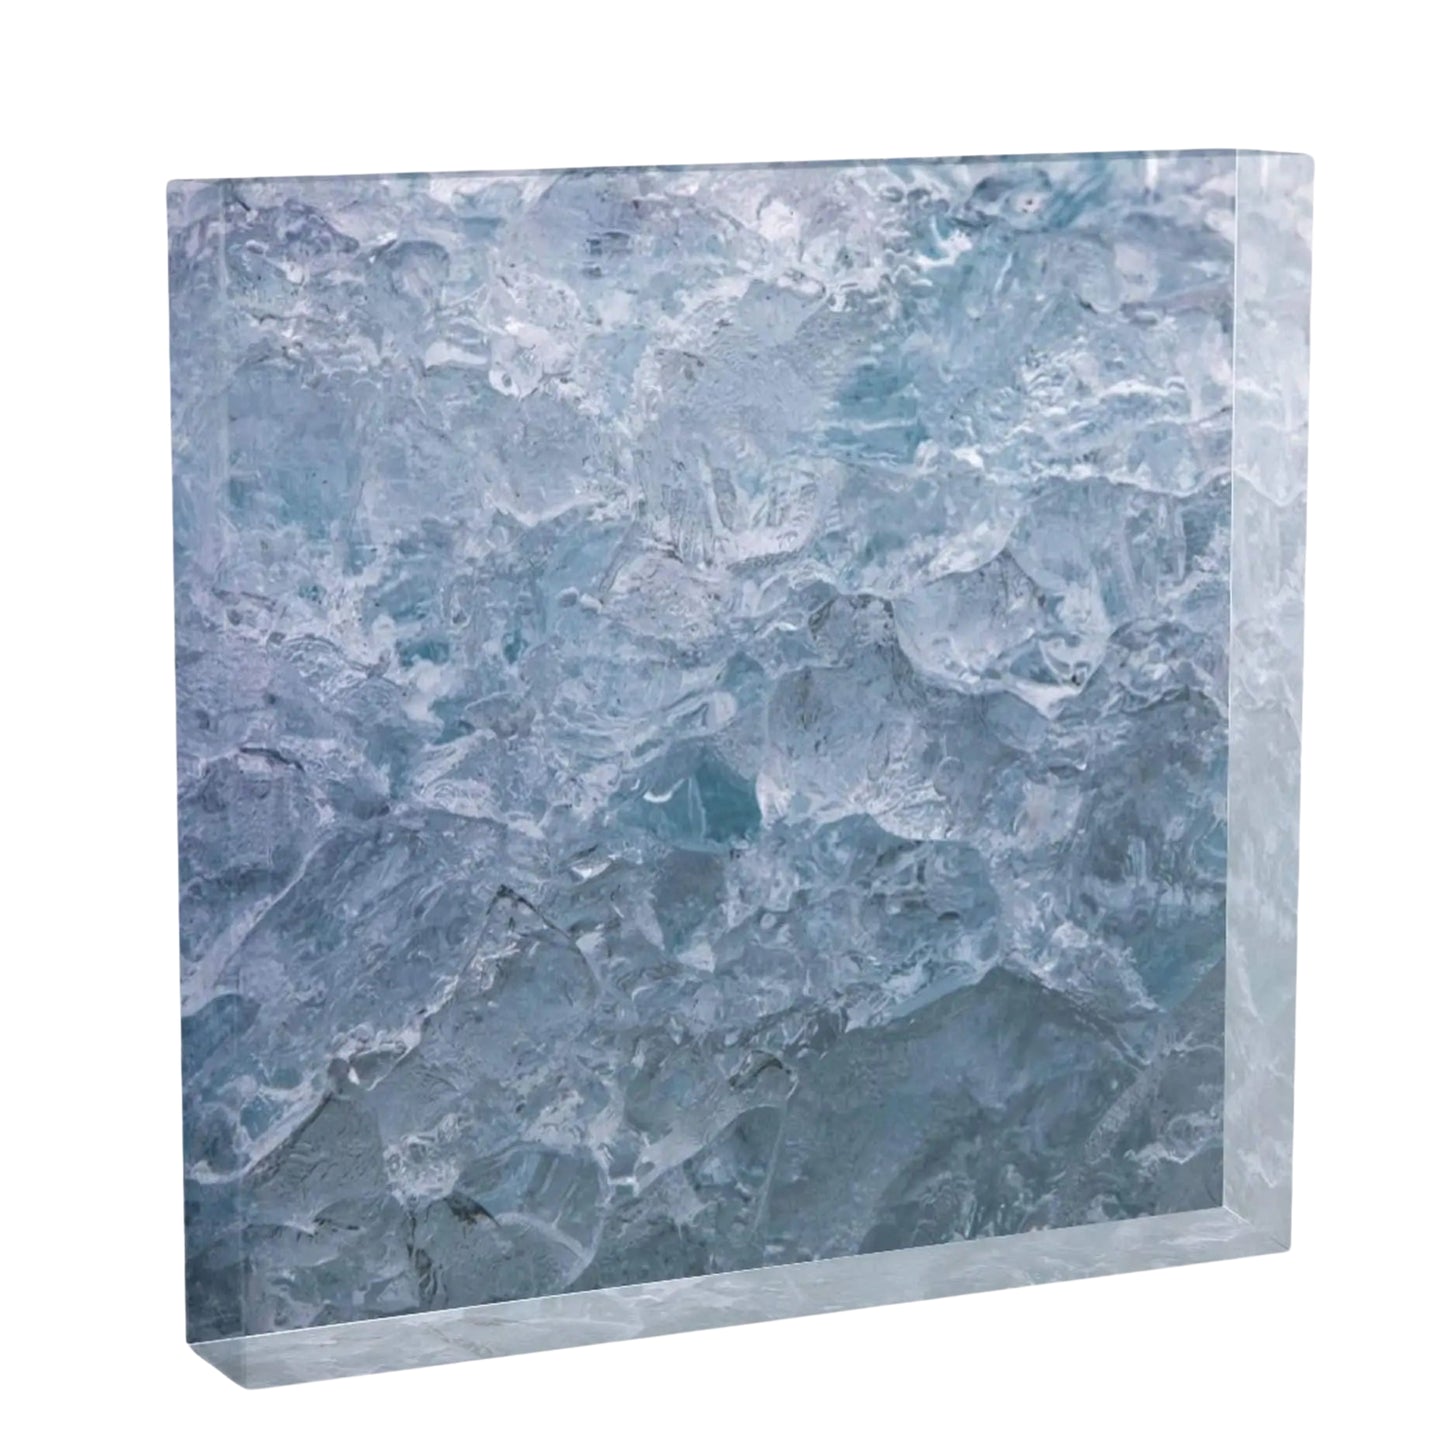 6x6 square acrylic block of Spencer Glacier ice floating in the lake unbelievable close detail of the ice